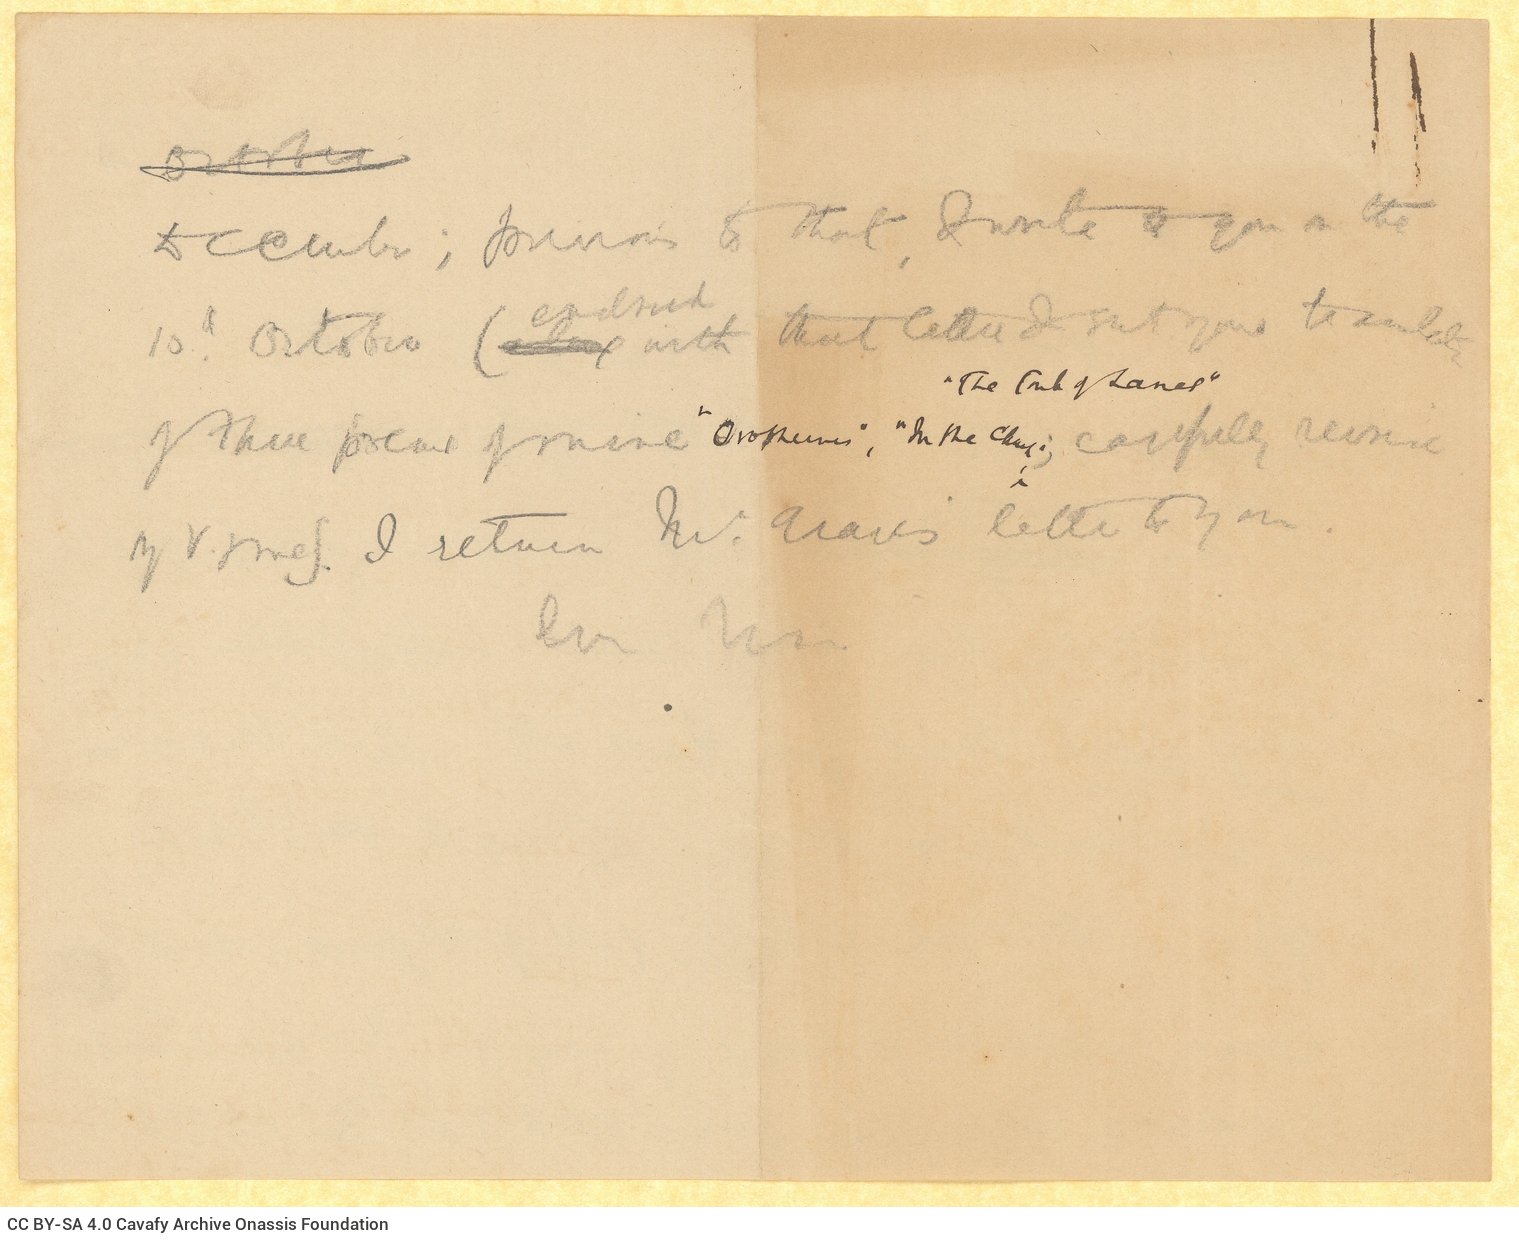 Handwritten draft letter by Cavafy to E. M. Forster on both sides of a sheet, regarding Robert Graves. Cancellations.